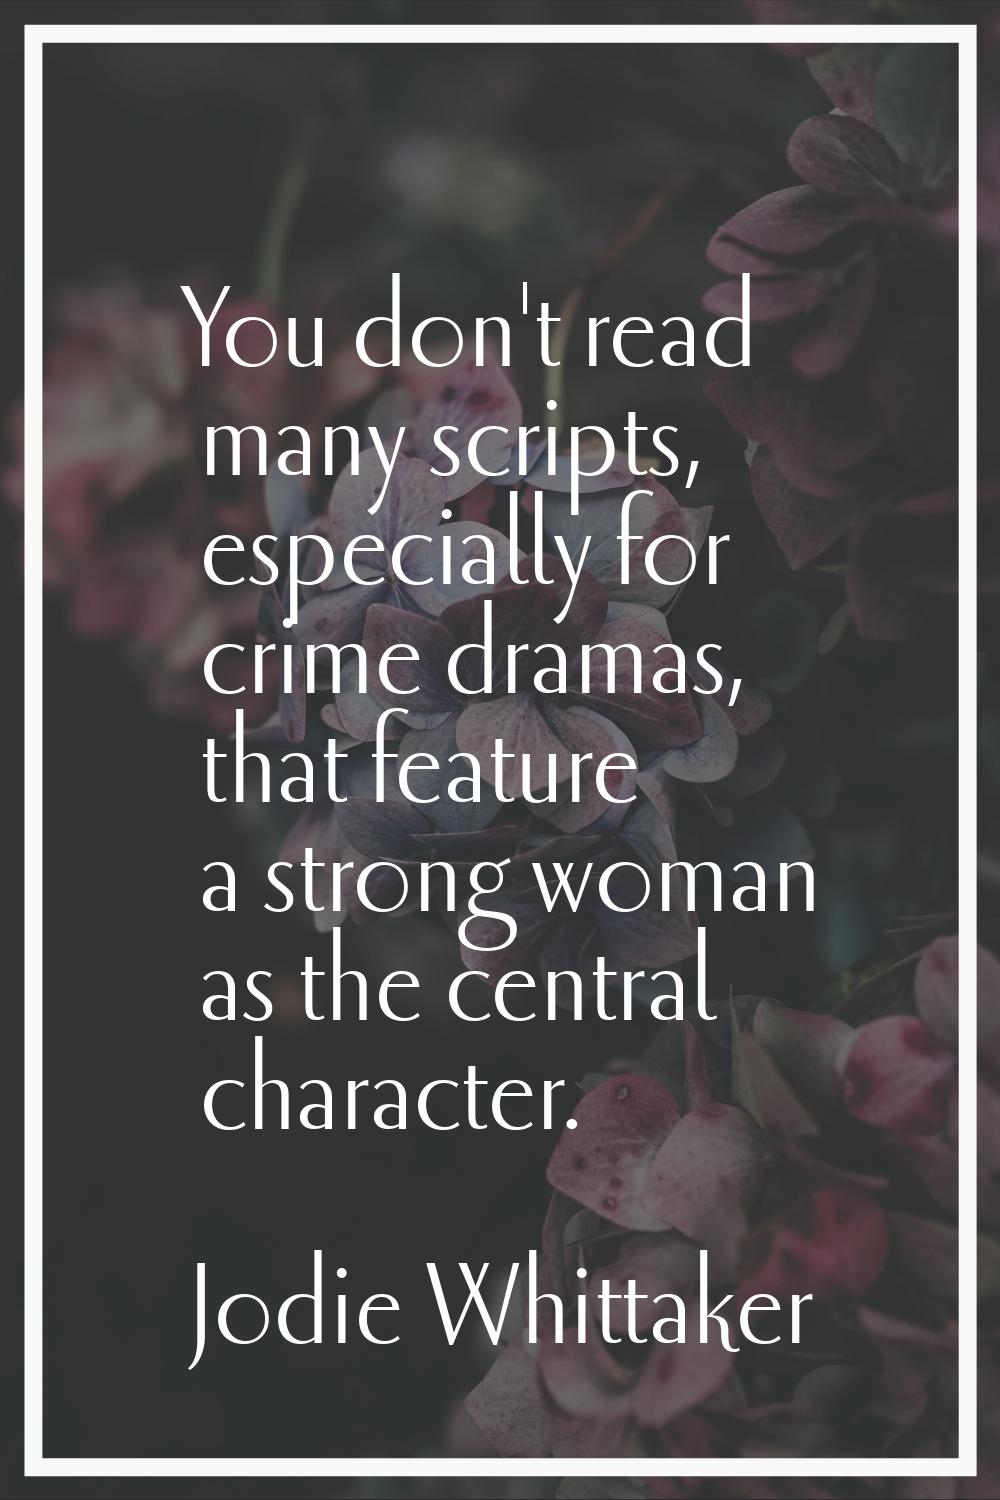 You don't read many scripts, especially for crime dramas, that feature a strong woman as the centra